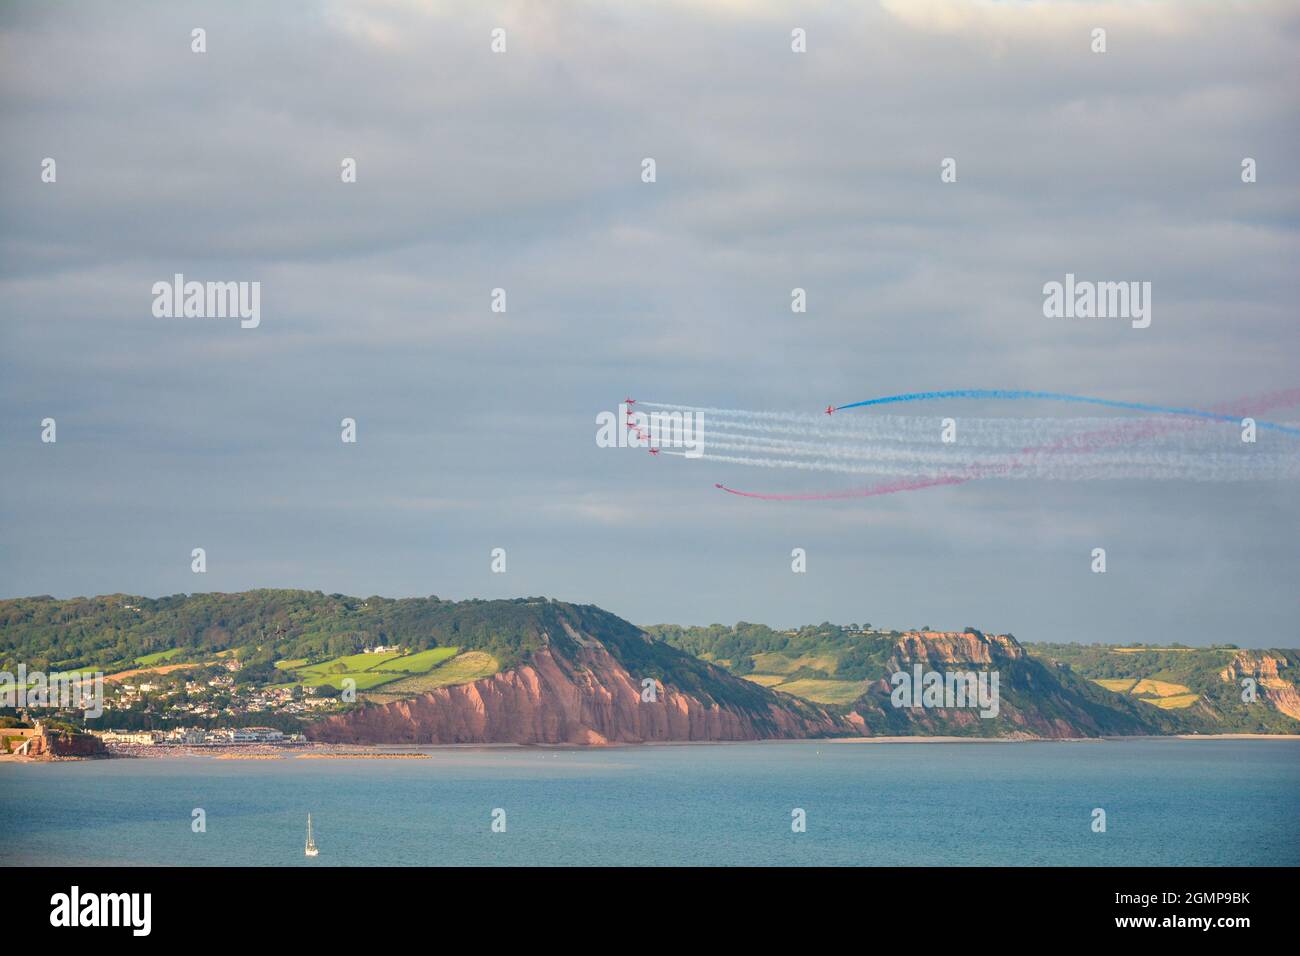 Sidmouth, September 2021: The Royal Air Force (RAF) Red Arrows perform with their BAE Hawk jet aircrafts at Sidmouth Air Show Stock Photo